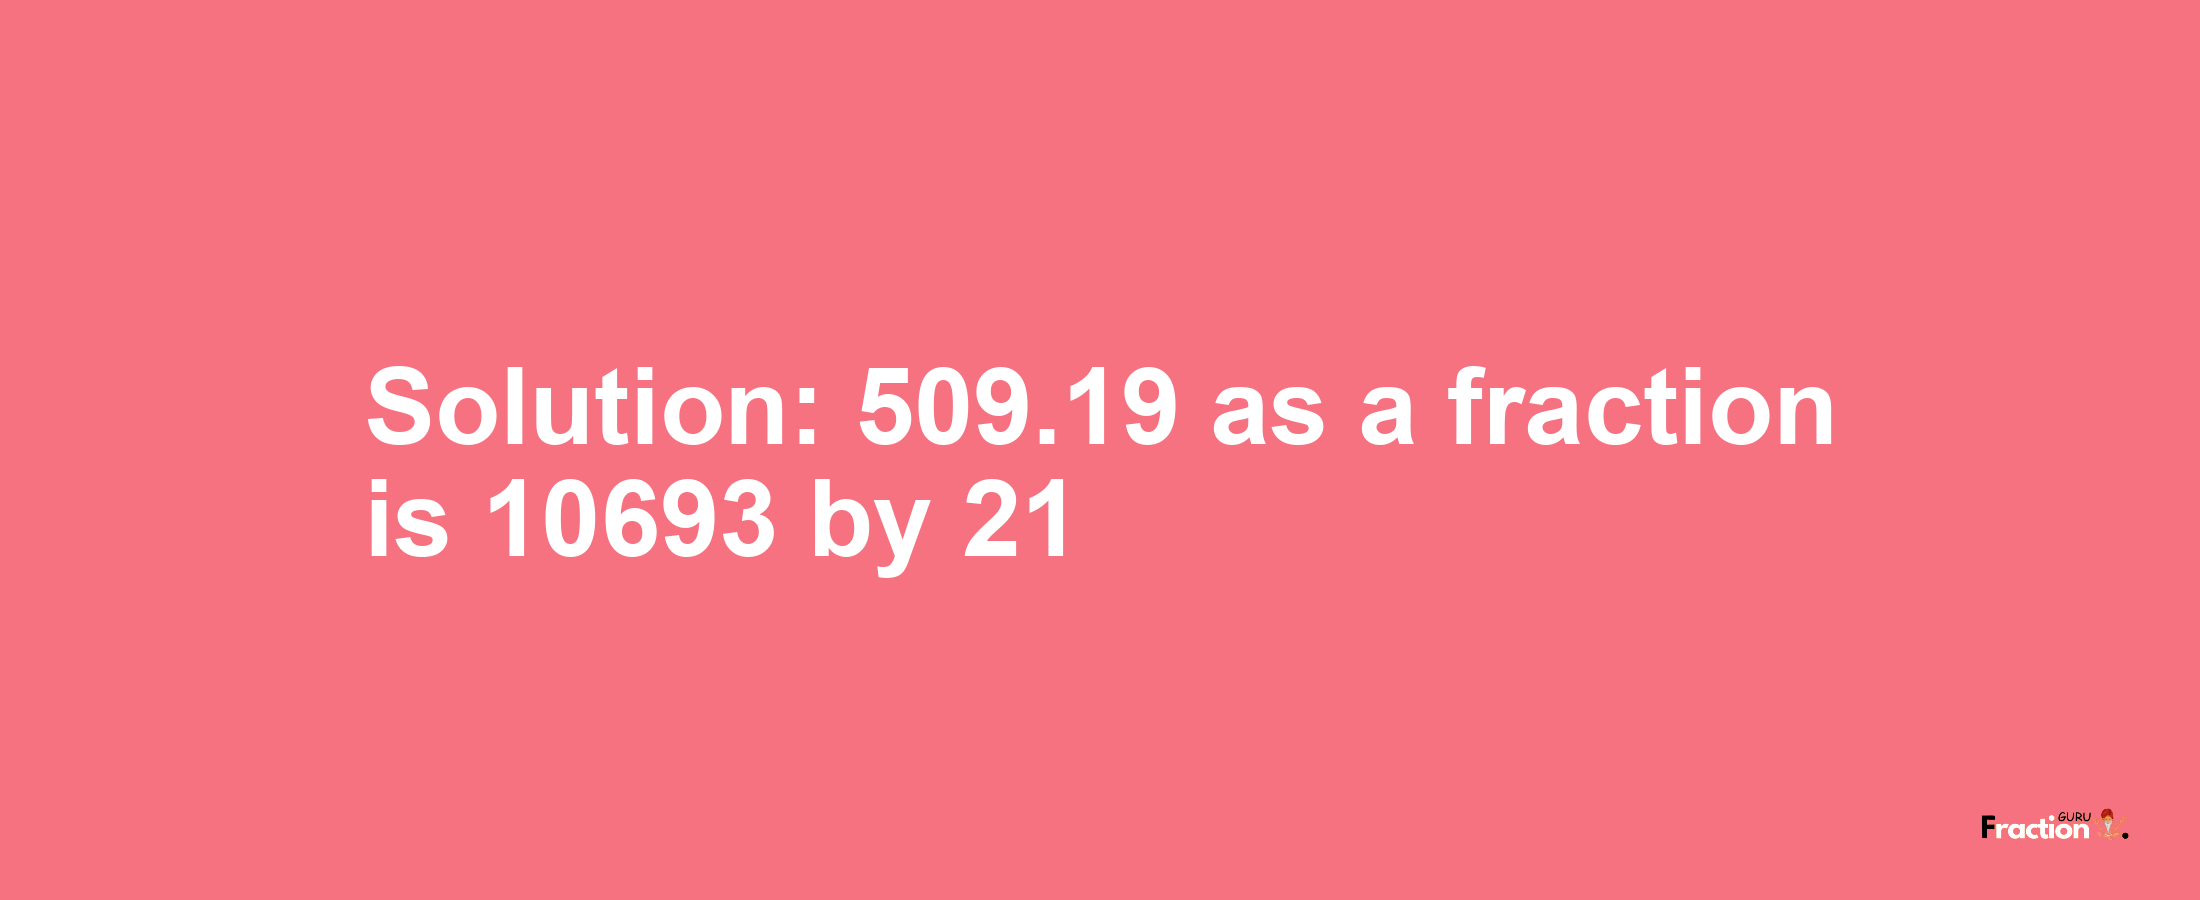 Solution:509.19 as a fraction is 10693/21